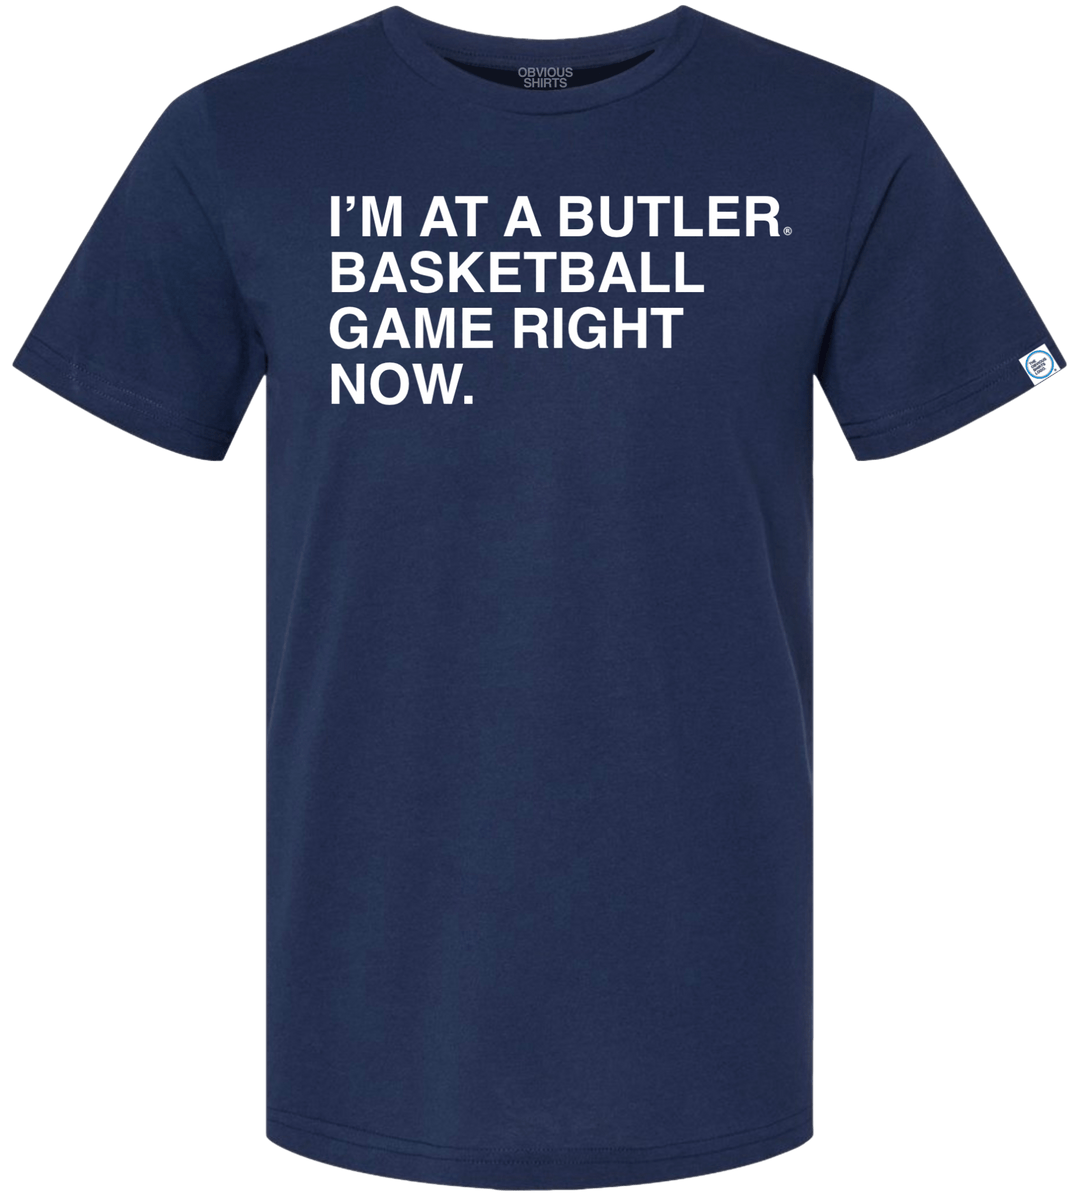 I'M AT A BUTLER BASKETBALL GAME RIGHT NOW. - OBVIOUS SHIRTS